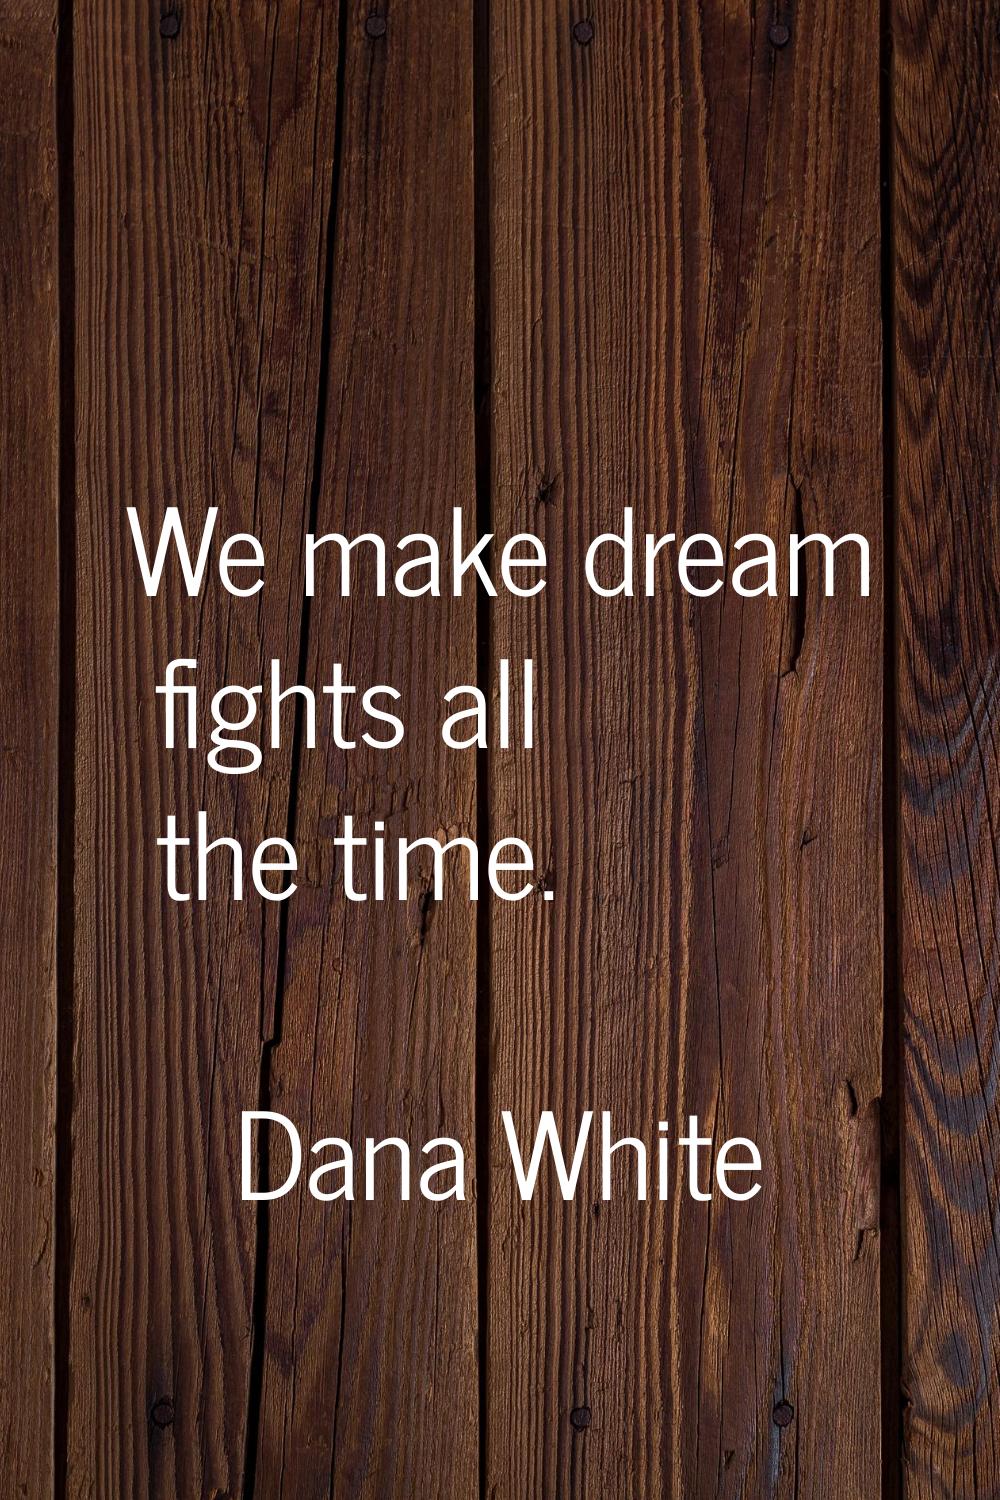 We make dream fights all the time.